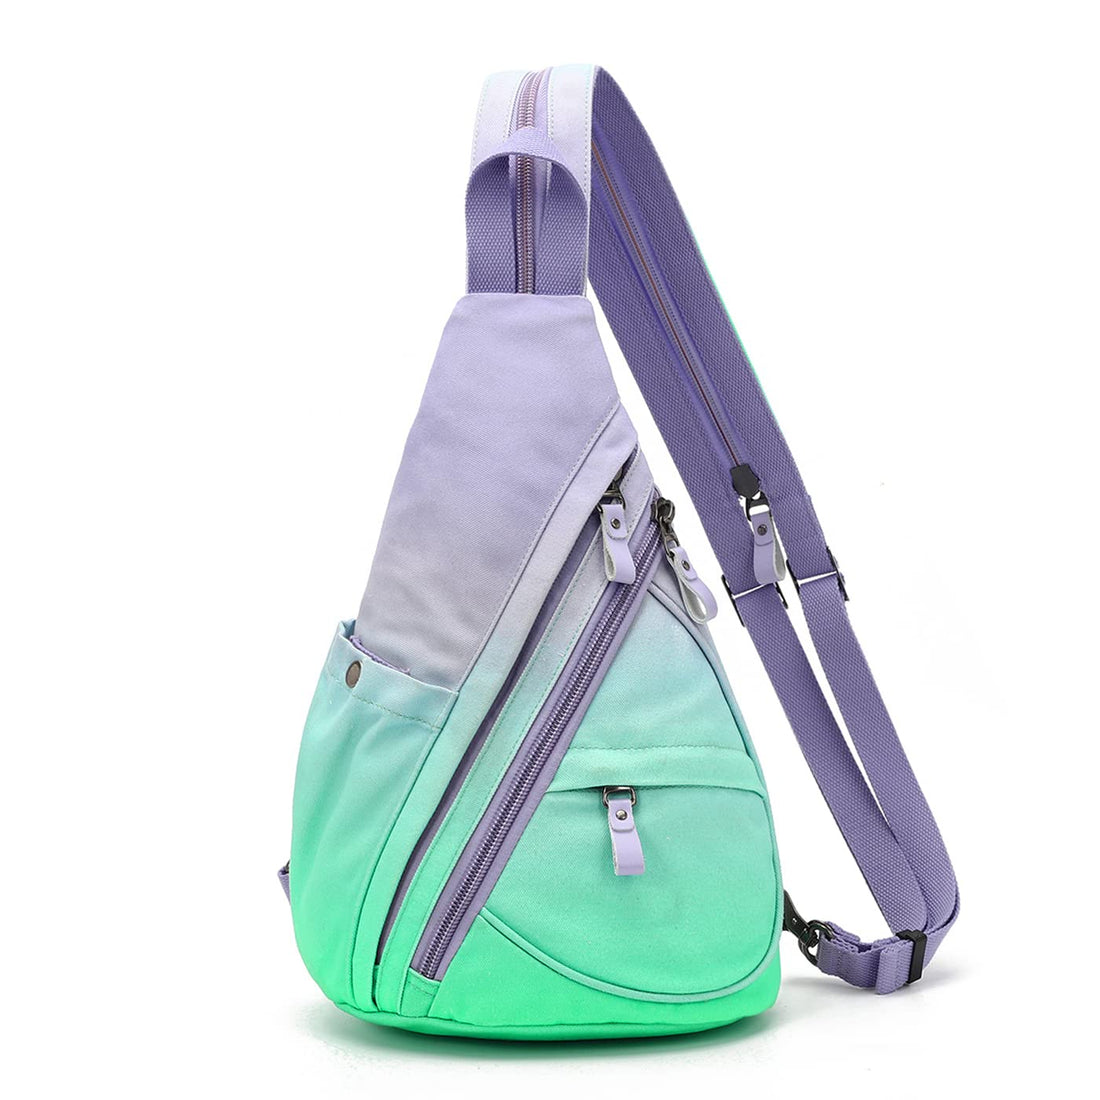 Canvas Sling Bag - Small Crossbody Backpack Shoulder Casual Daypack Rucksack for Men Women Outdoor Cycling Hiking Travel, 6881-r-palepurple+smaragdine